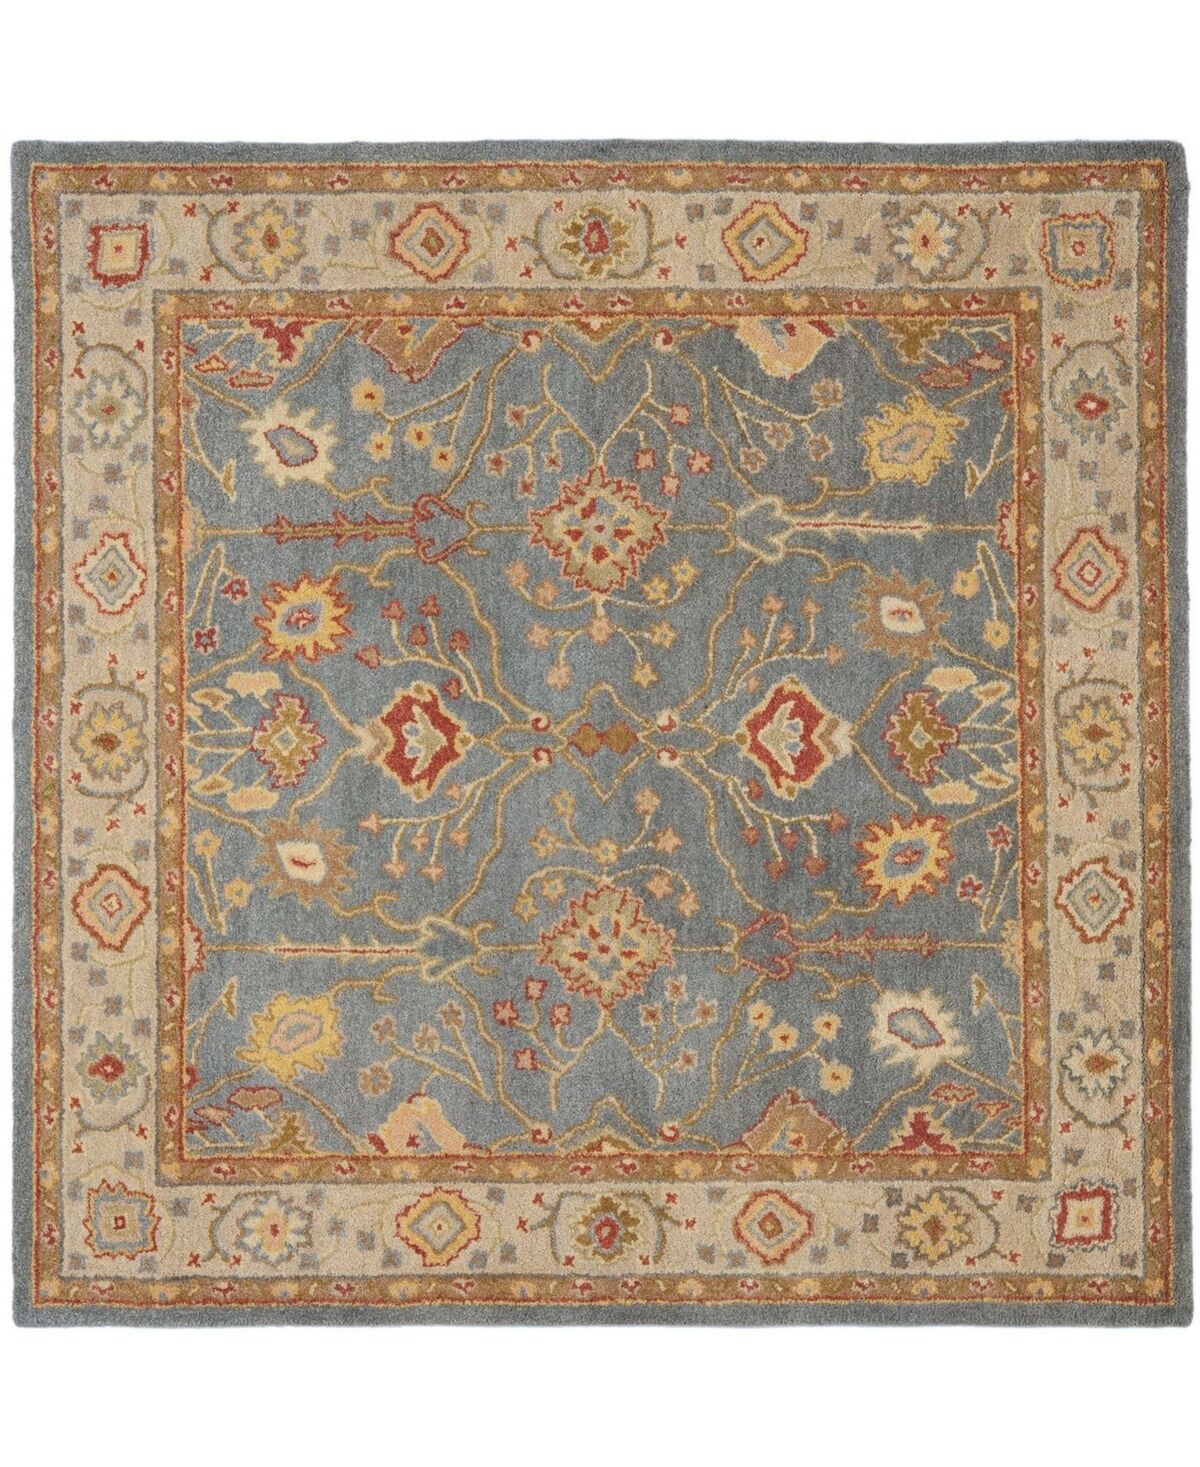 Safavieh Antiquity At314 Blue and Ivory 6' x 6' Square Area Rug - Blue